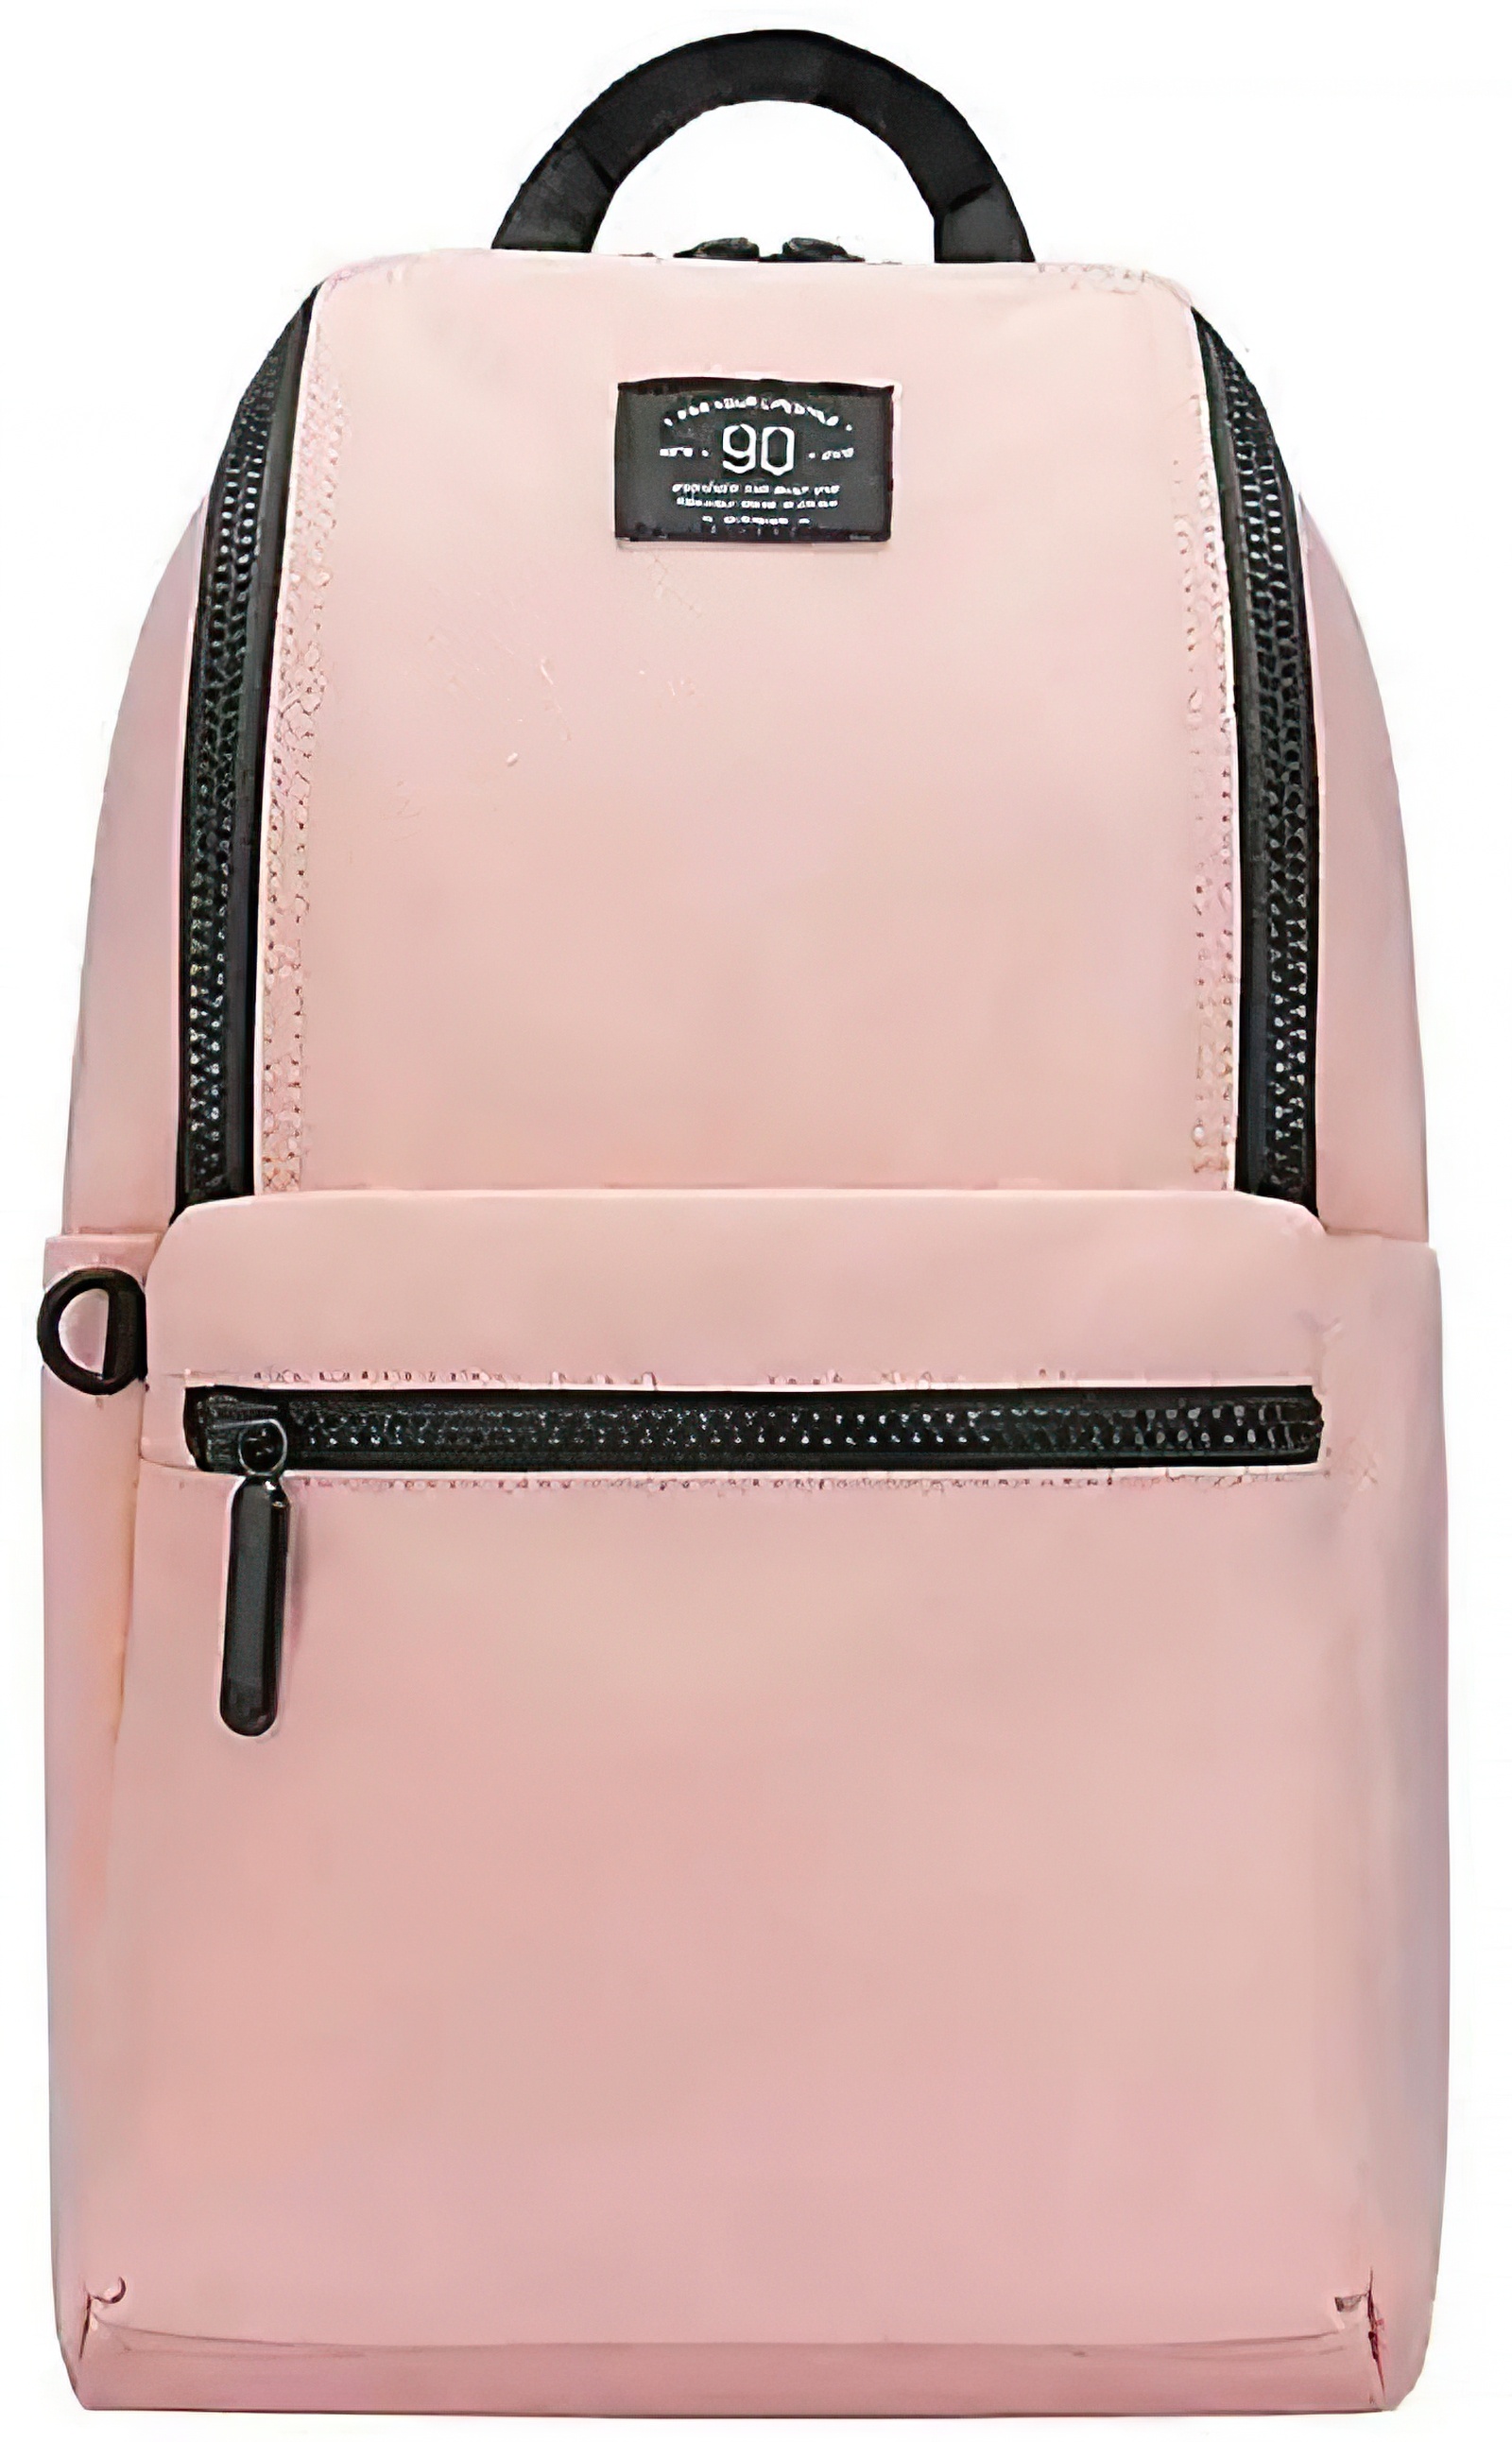 Xiaomi 90 Points Pro Leisure Travel Backpack 18L Pink КАРКАМ